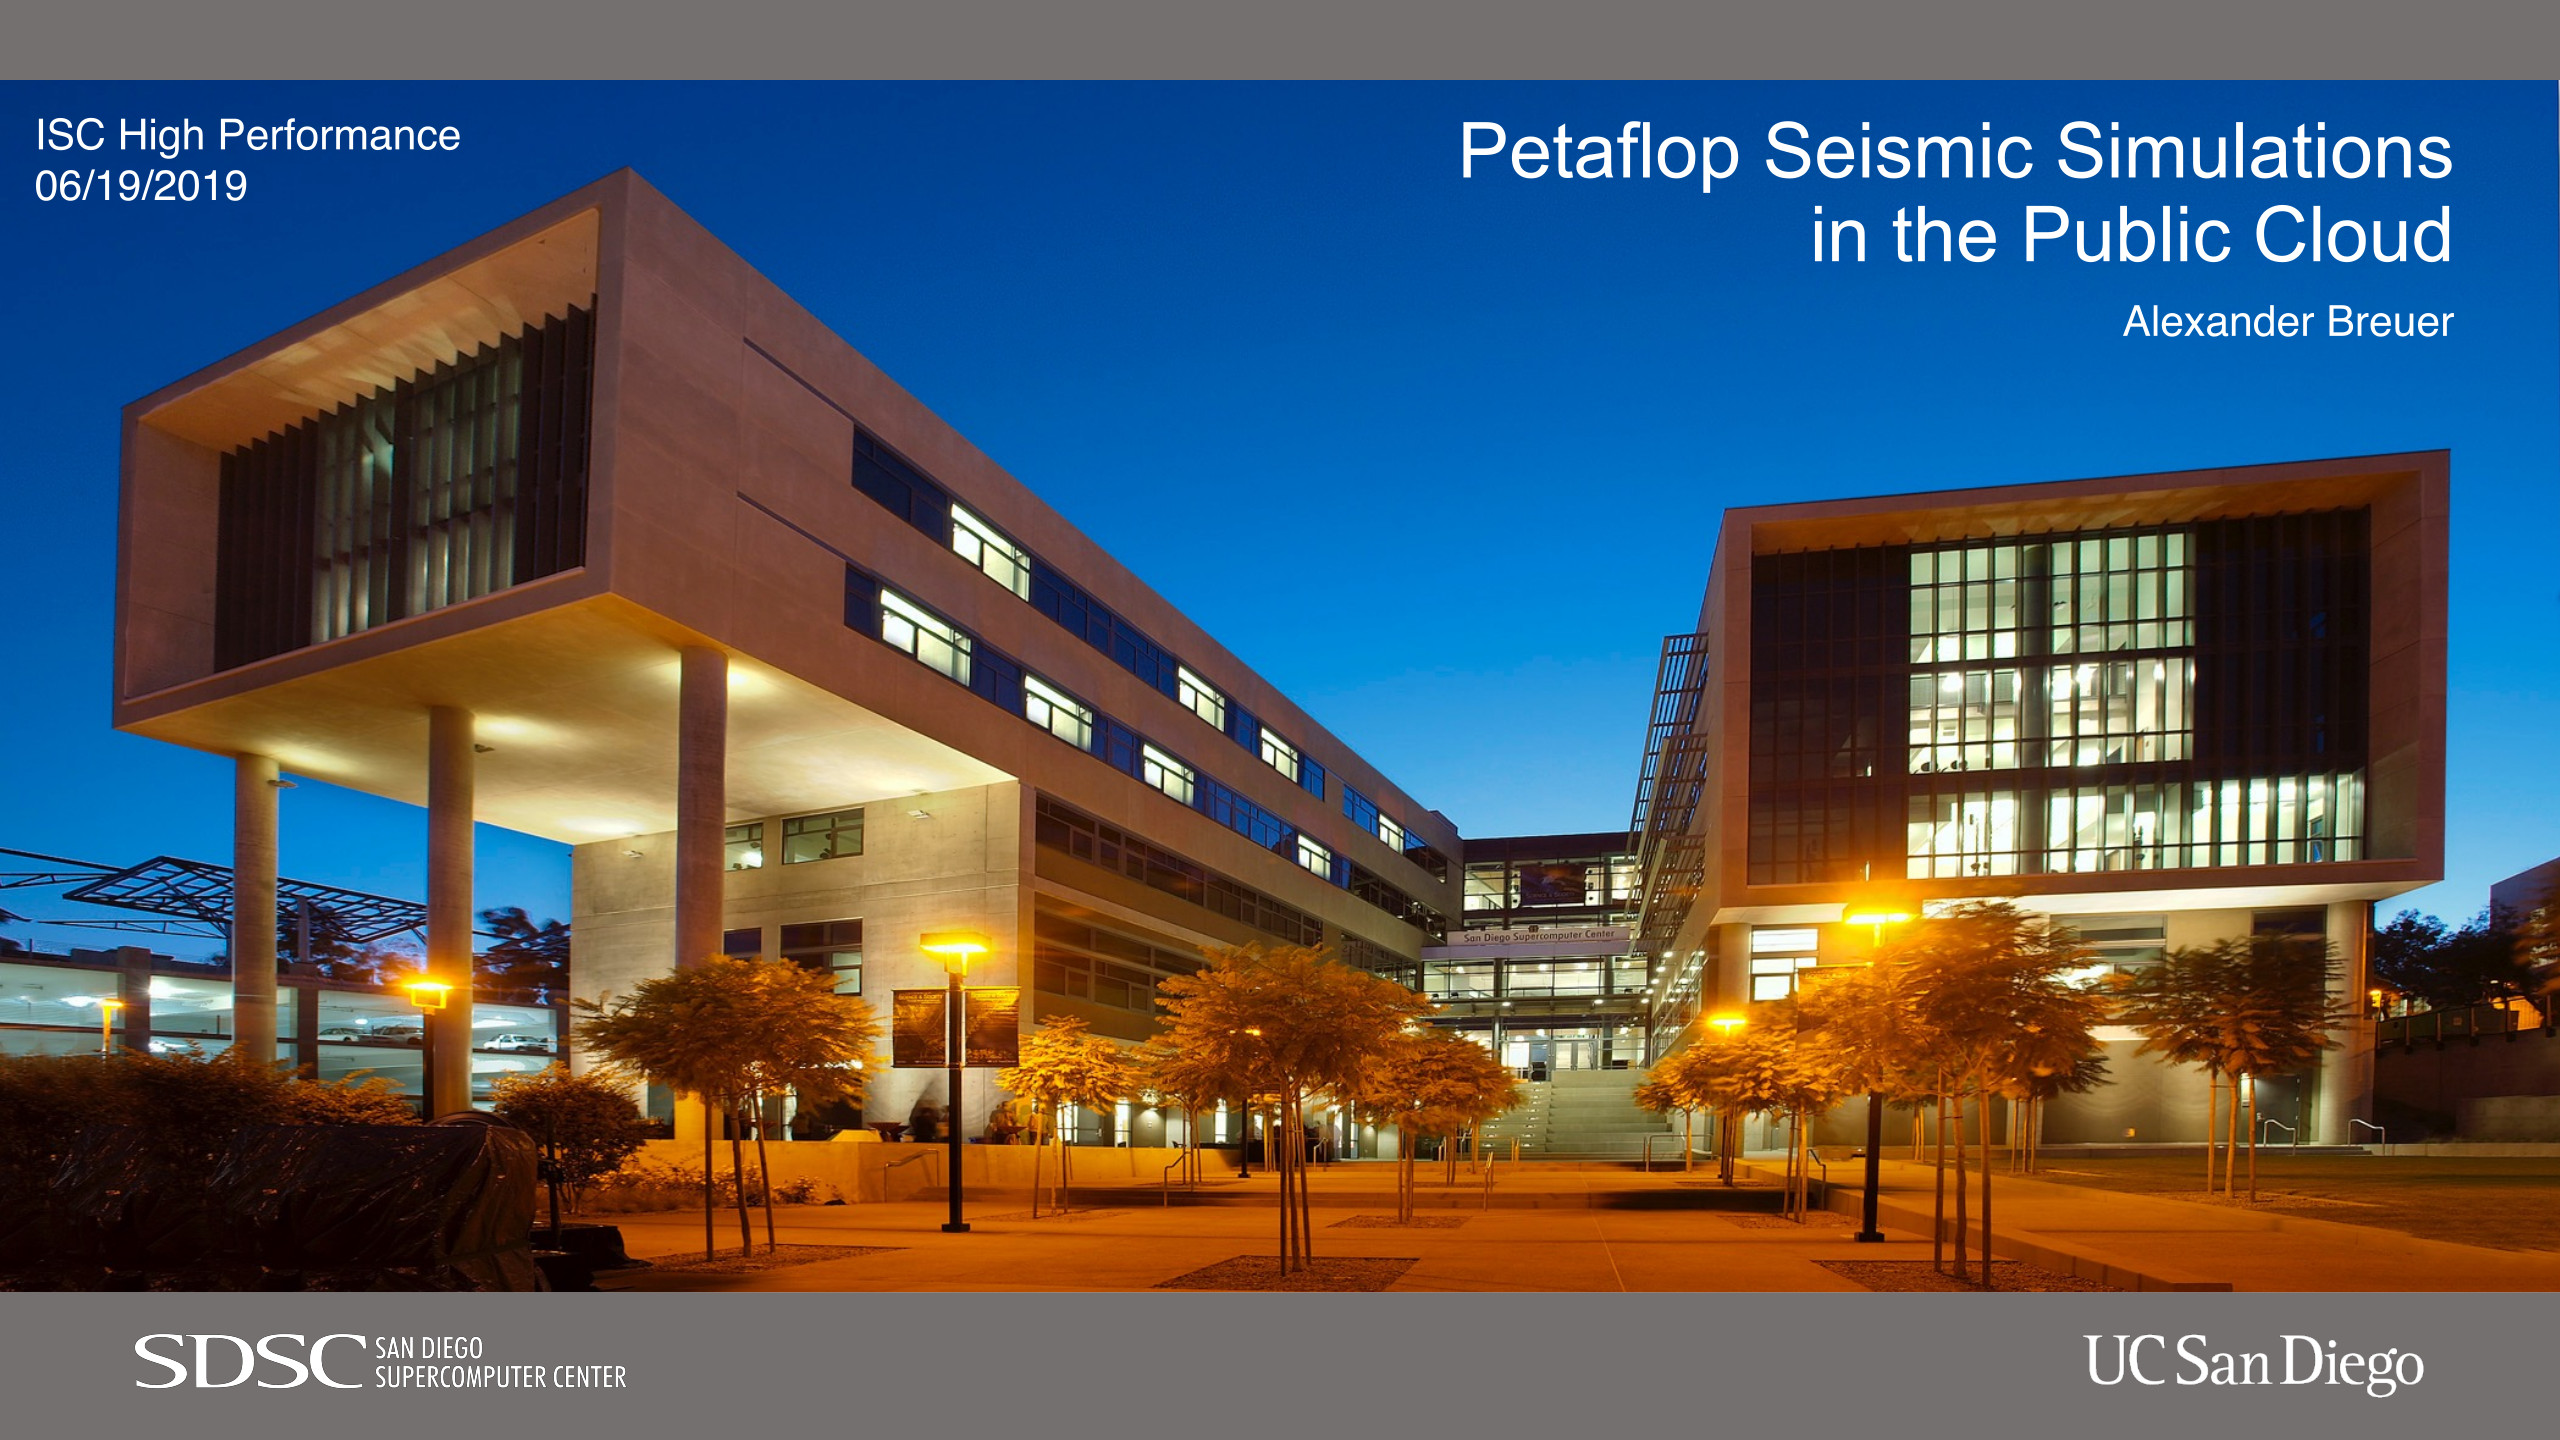 Slides of the presentation "Petaflop Seismic Simulations in the Public Cloud" at the ISC High Performance 2019 conference